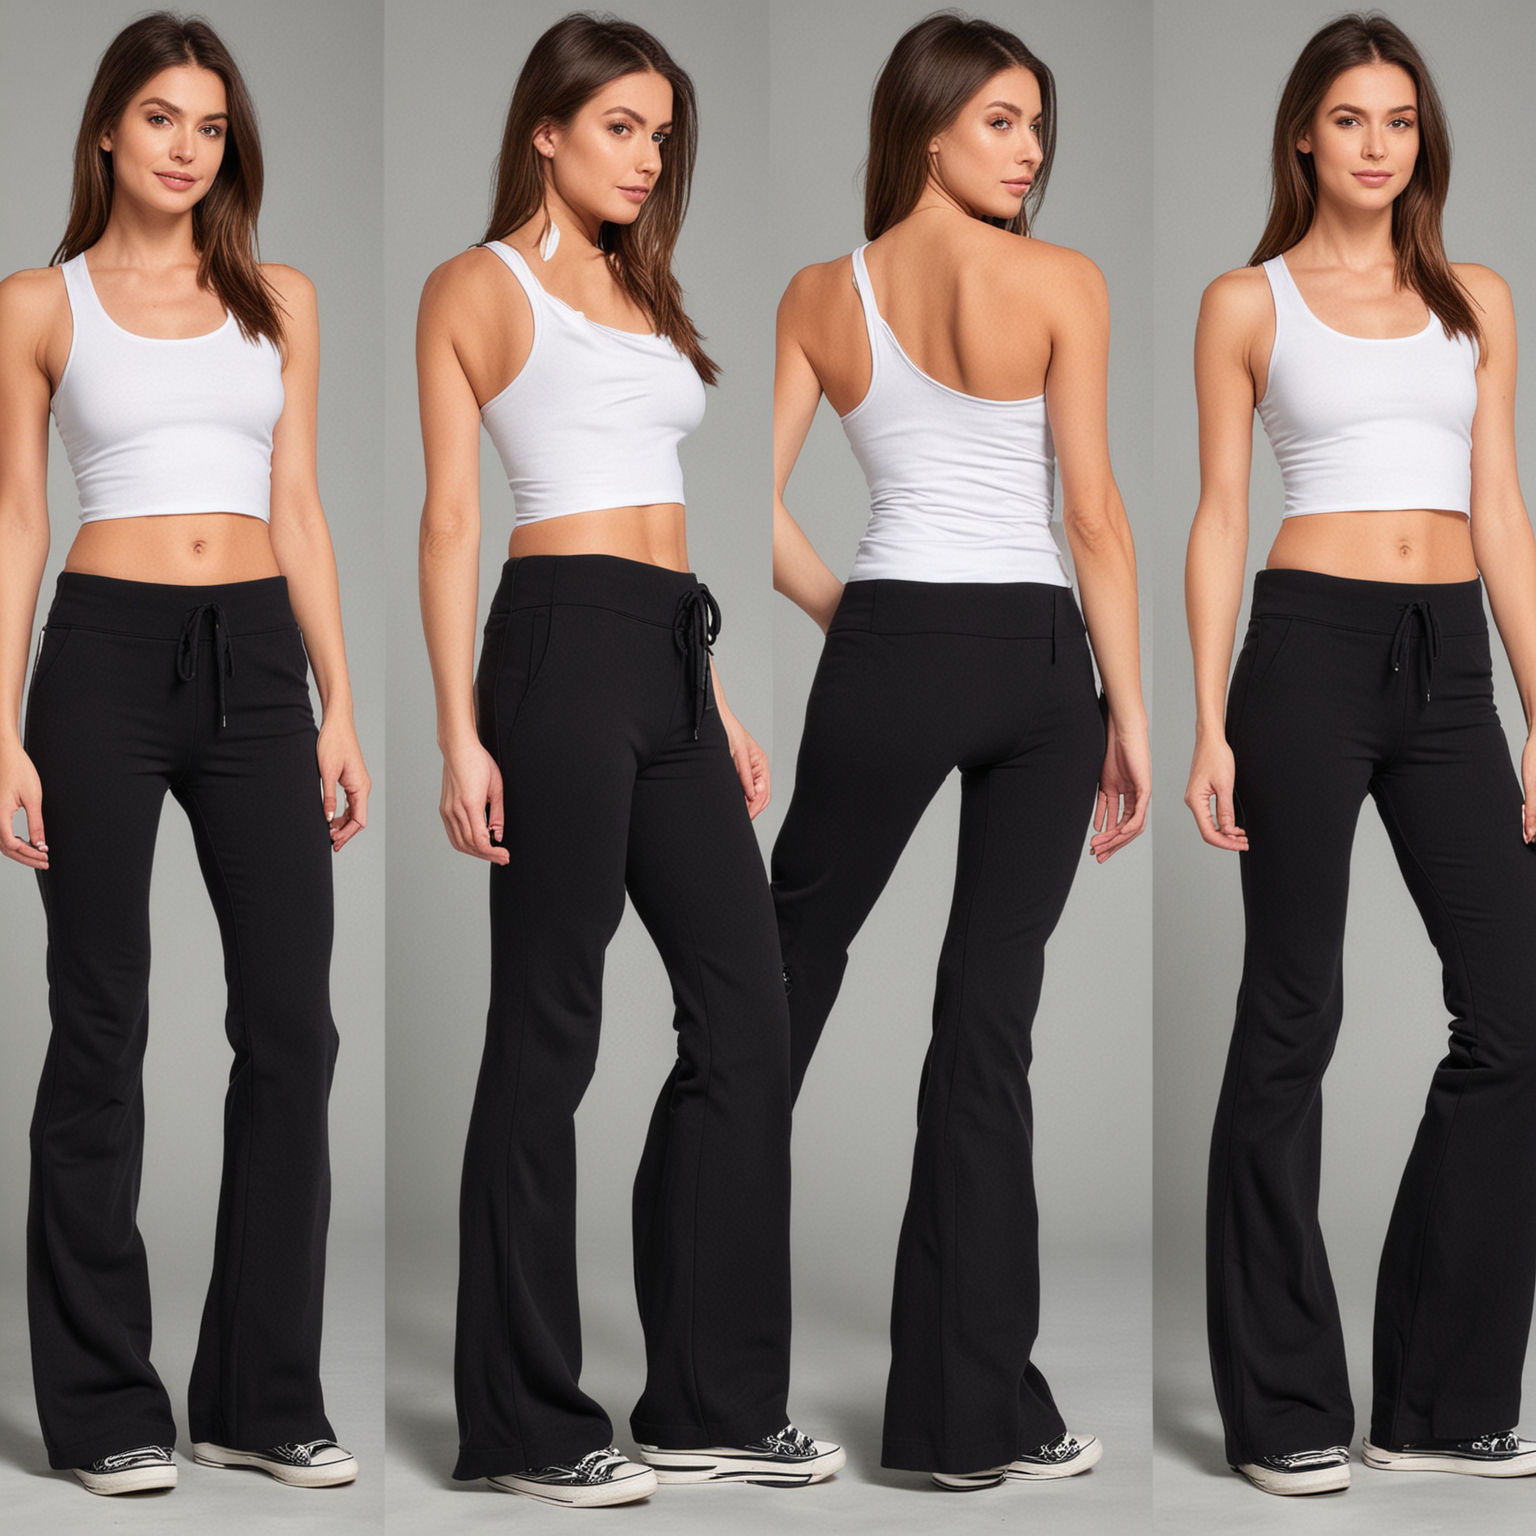 Generate image of a slim women wearing black cotton flare track pants from 4 angles
